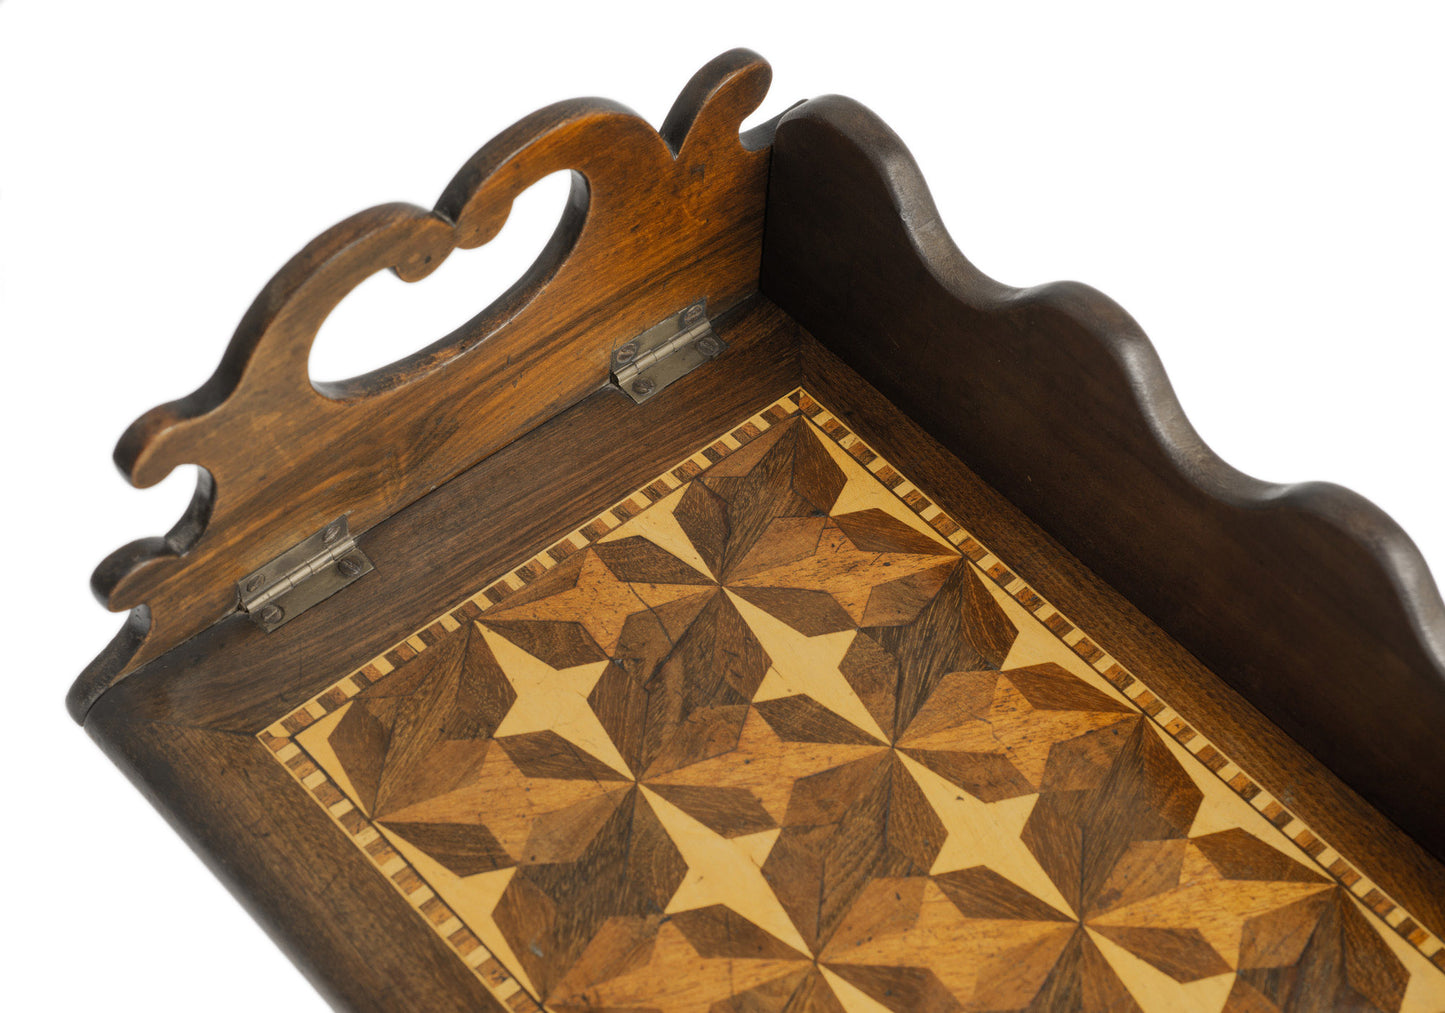 Antique Victorian Library/Study Parquetry Folding Book Tray/Carry Trough c1860 (Code 2679)